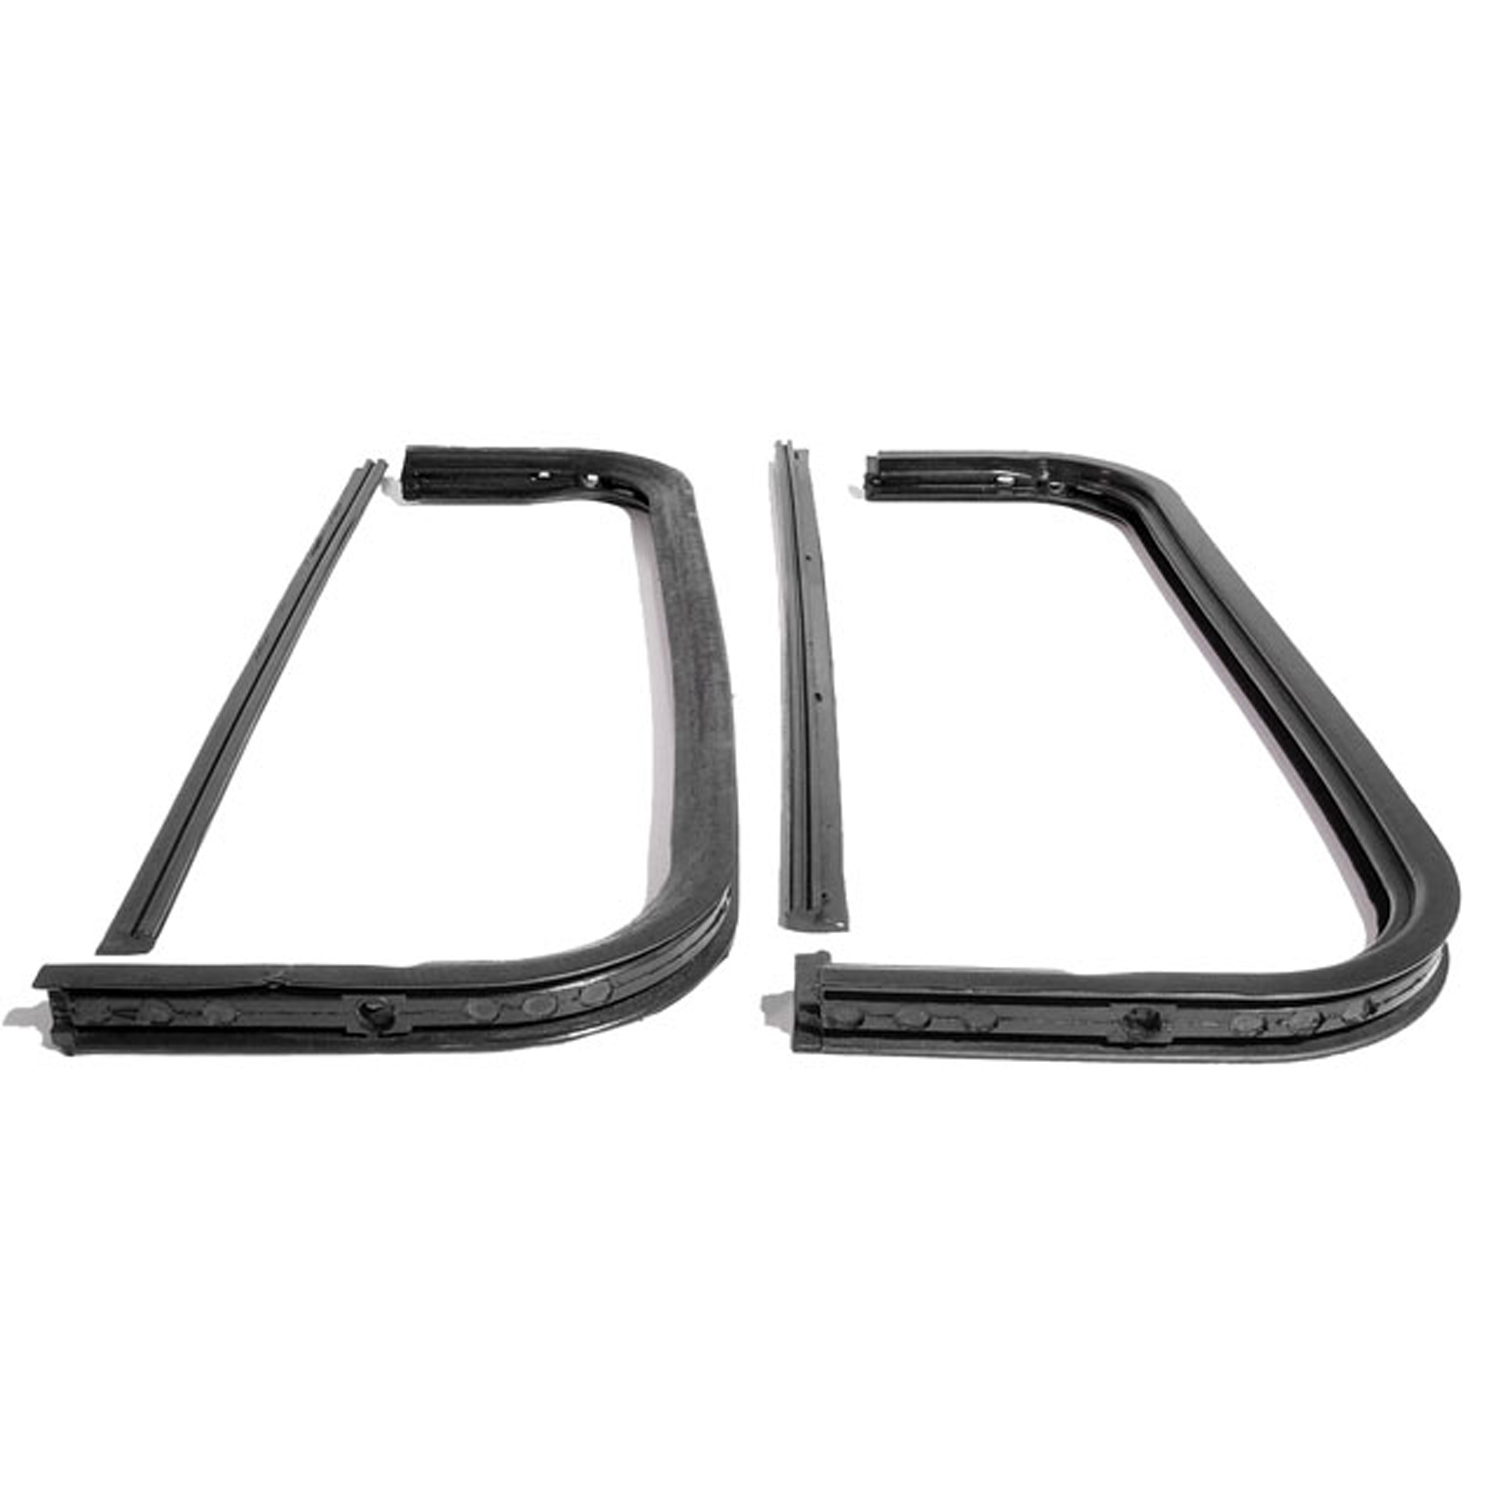 1961 Chevrolet K20 Pickup Vent Window Seals with Division Post Seals-WR 1900